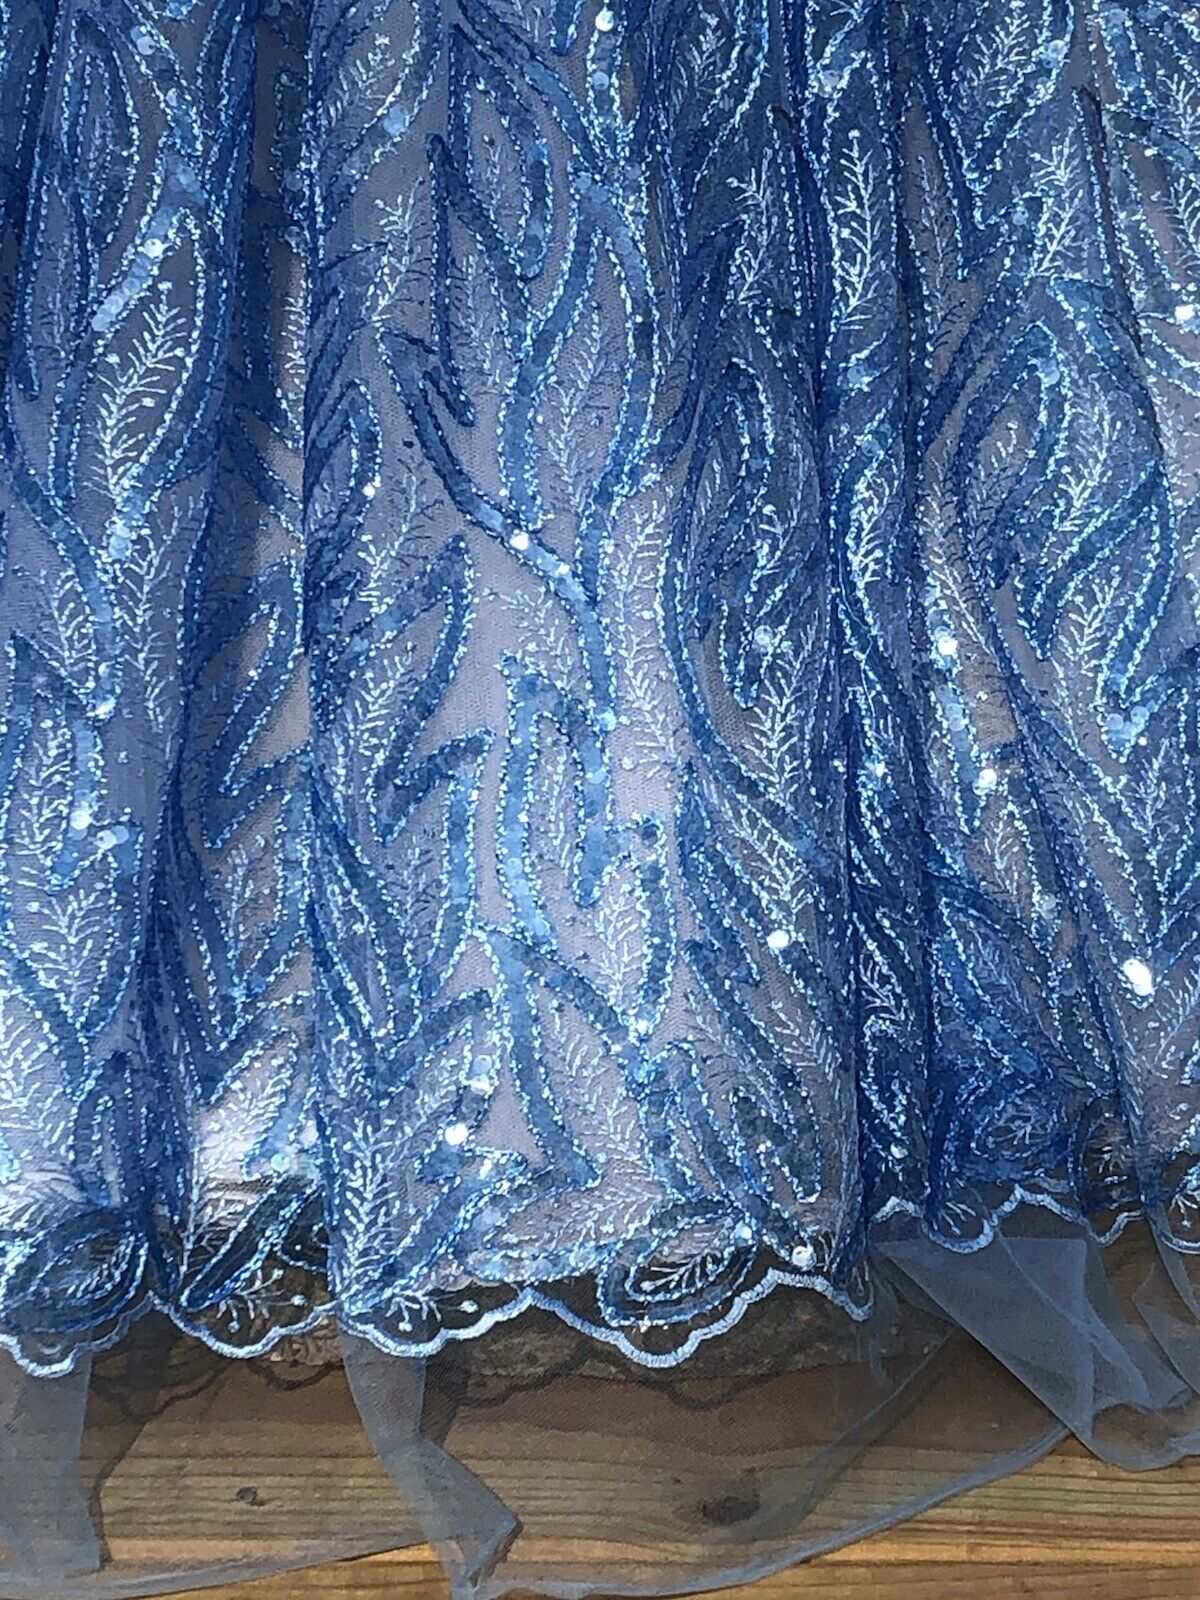 Luxury Blue Sequined Sparkly Lace